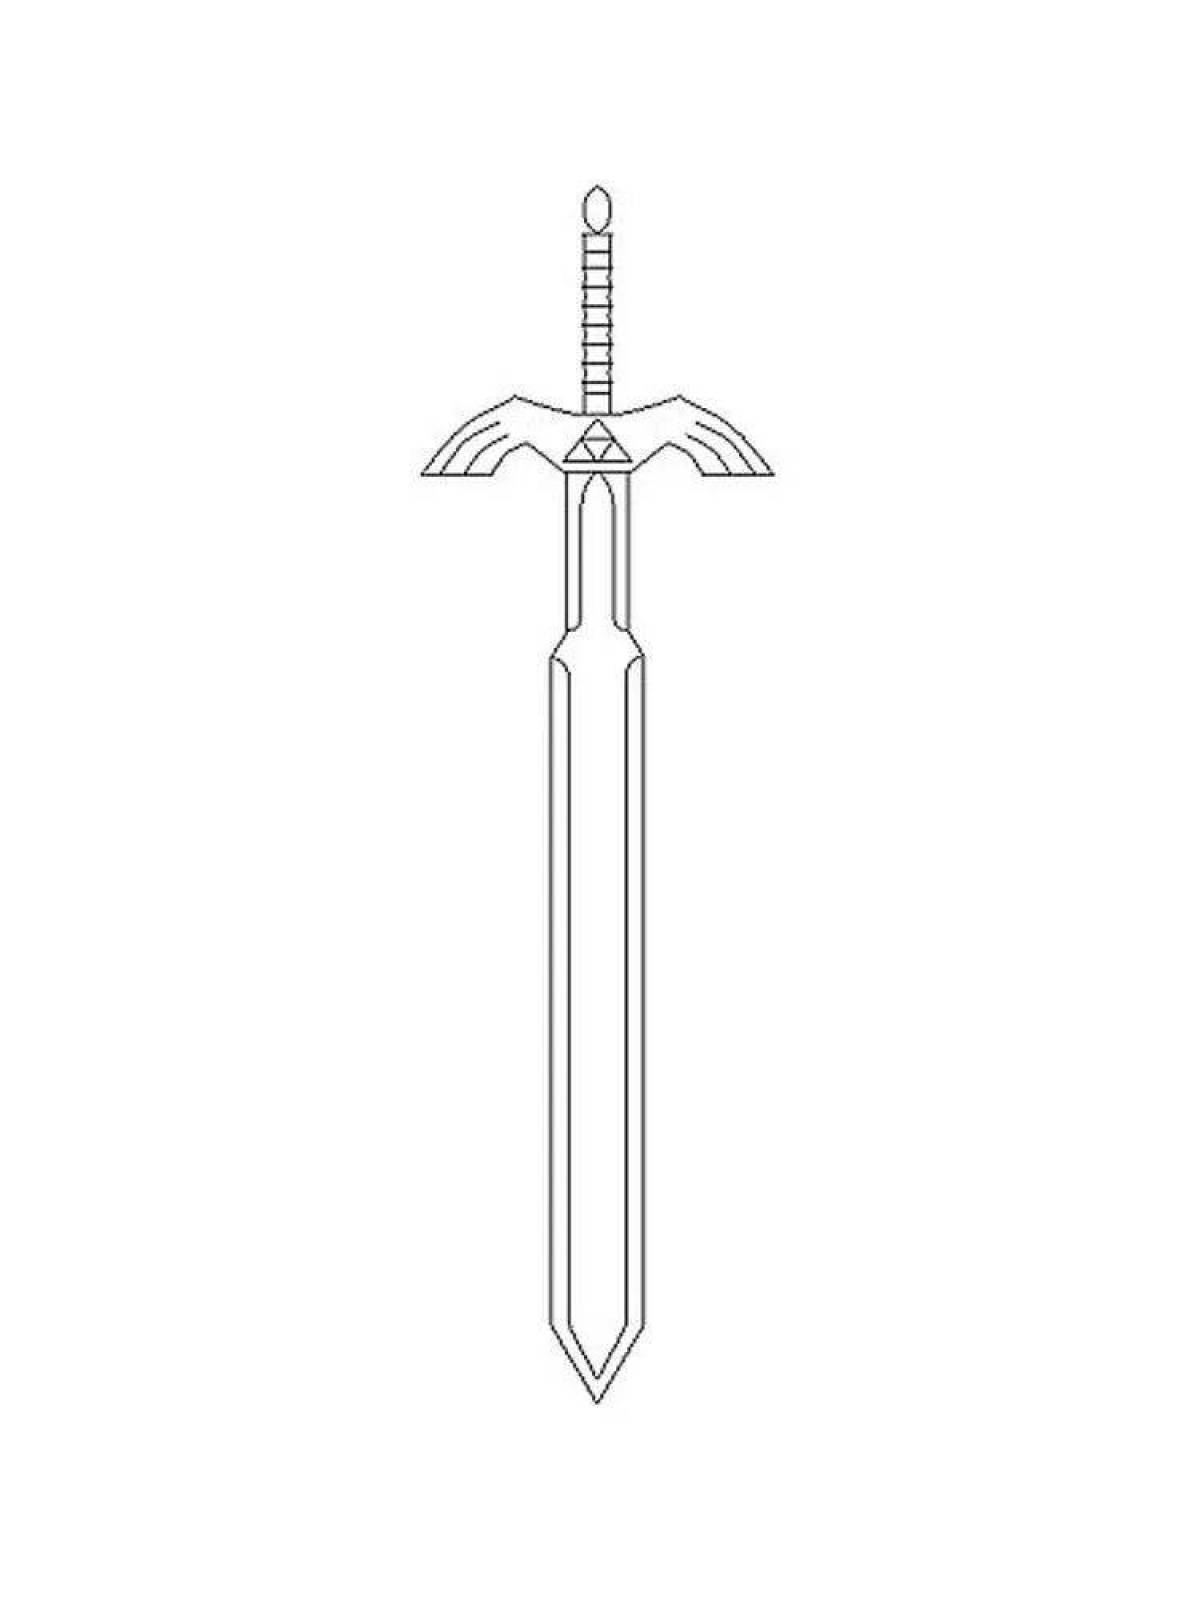 Vibrant sword coloring page for kids